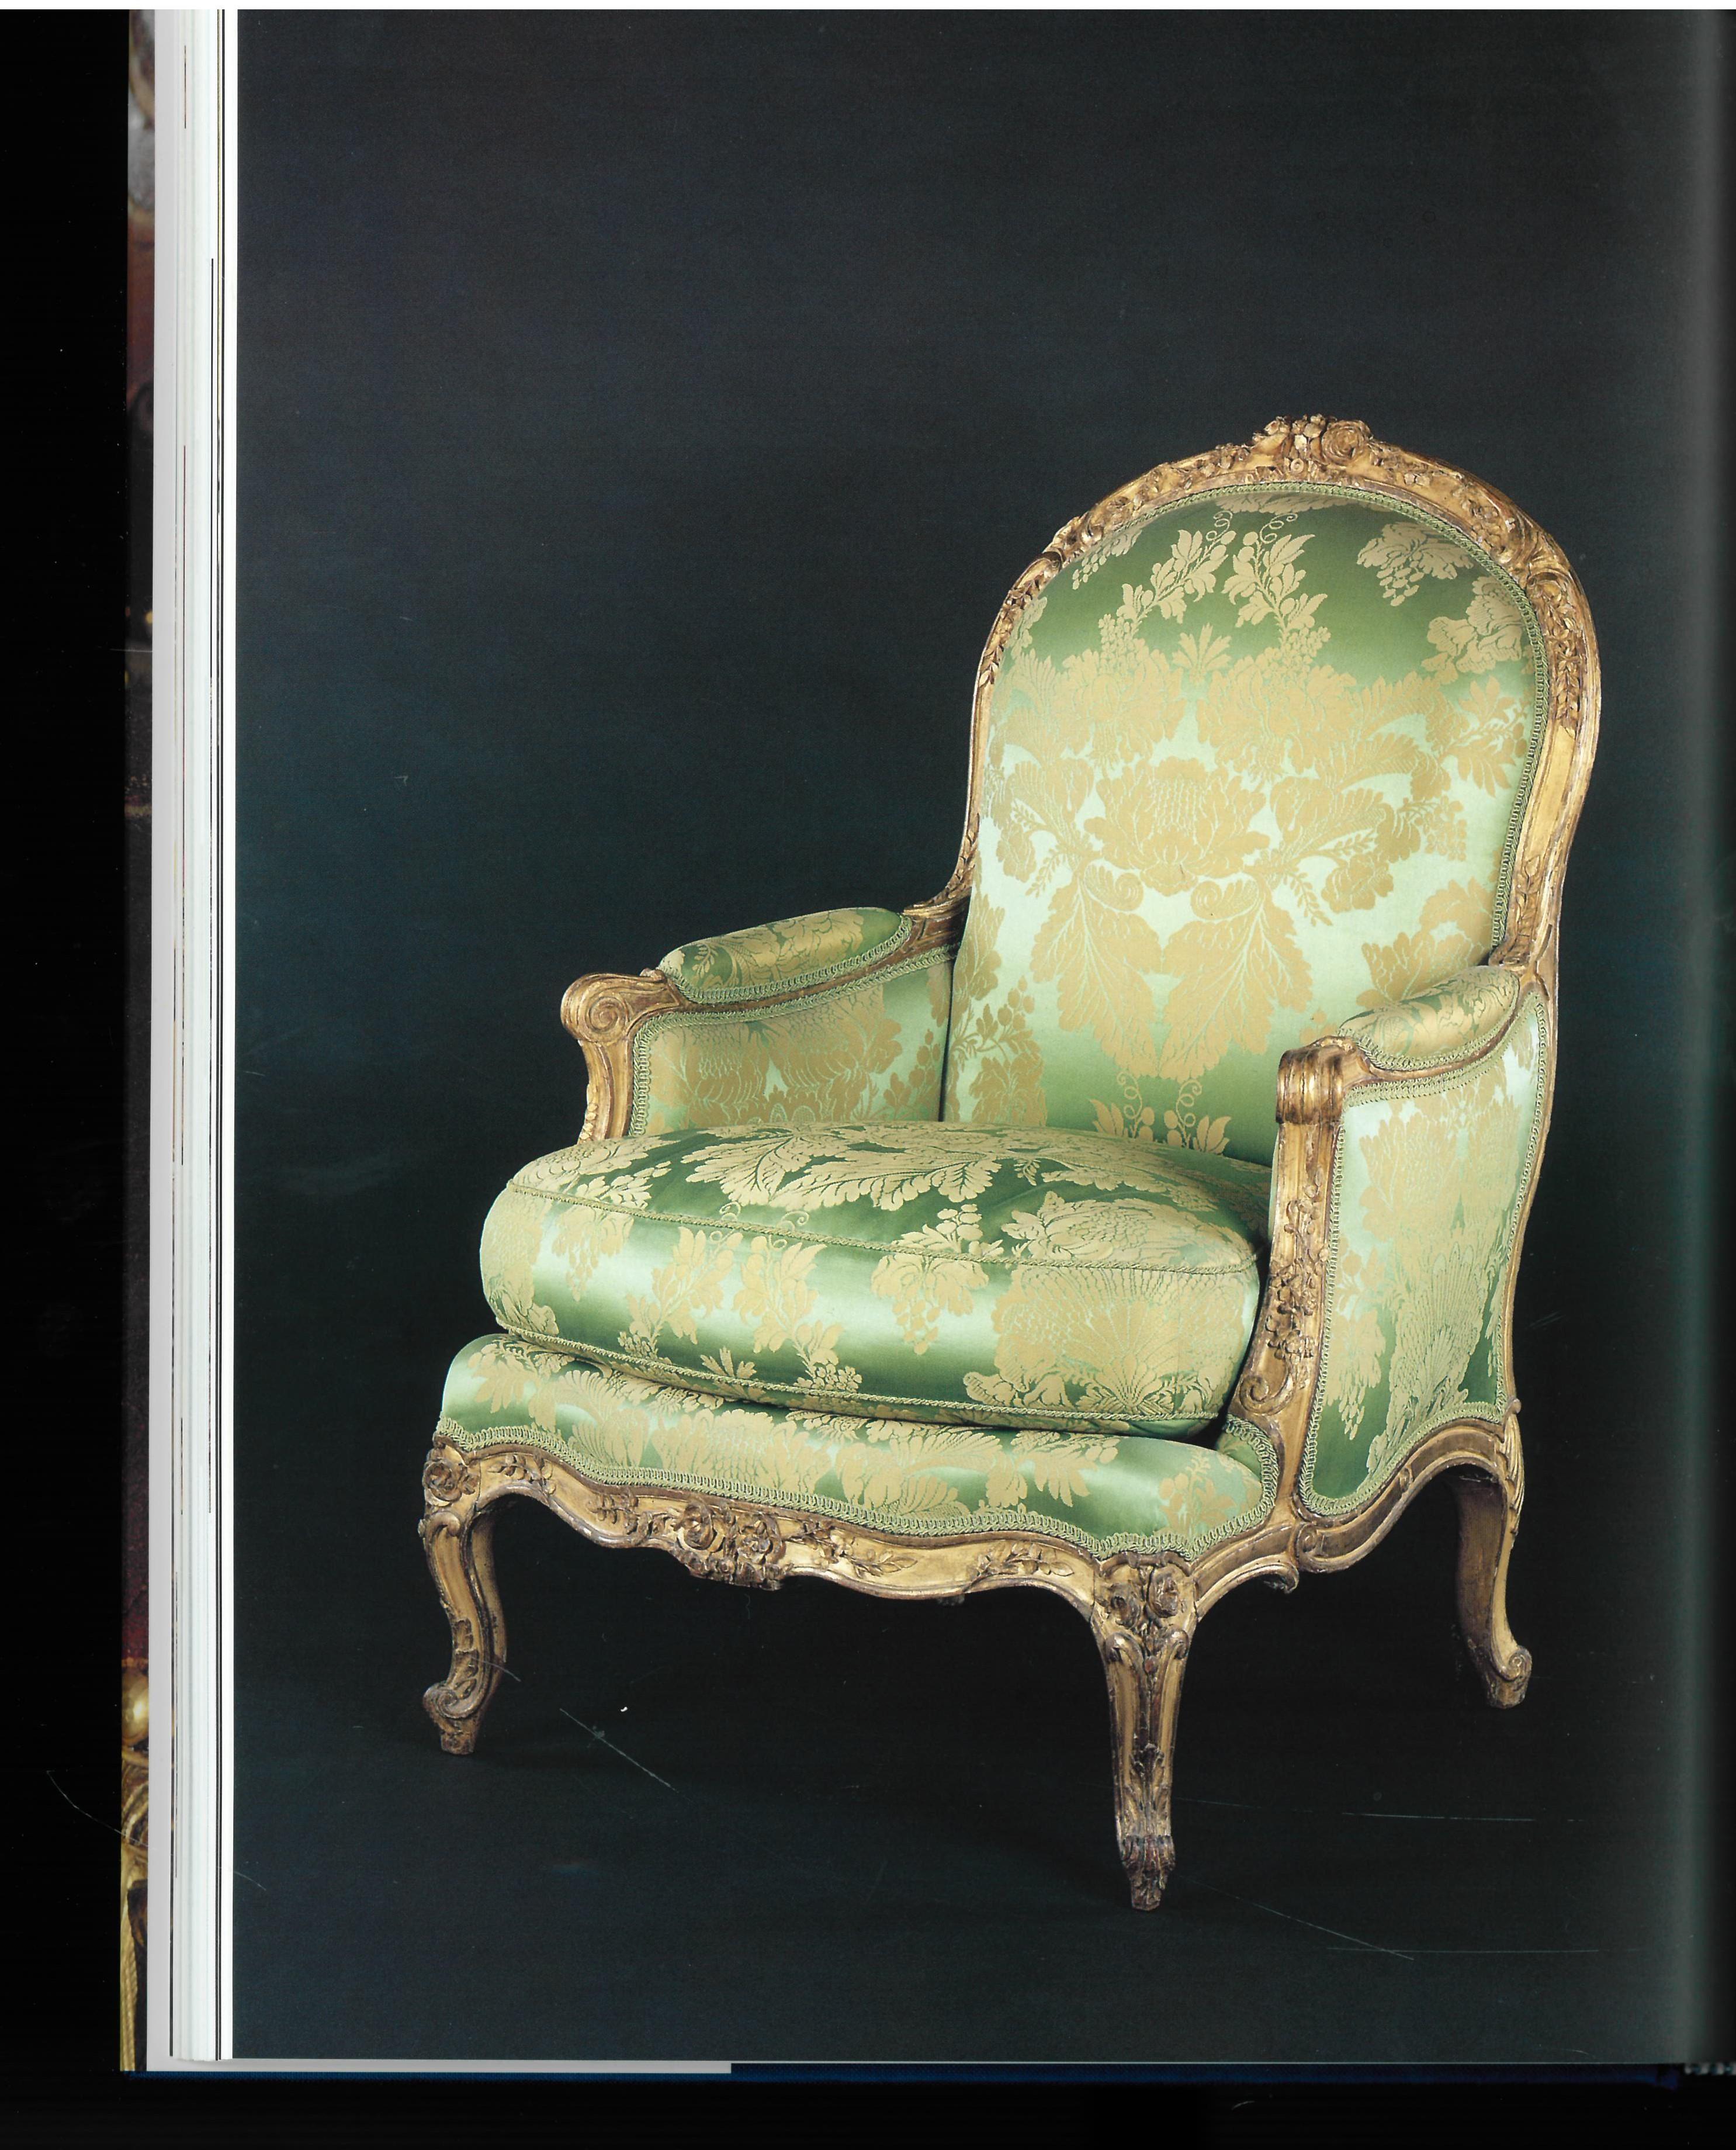 18th Century and Earlier Furniture Collections in the Louvre (Book)